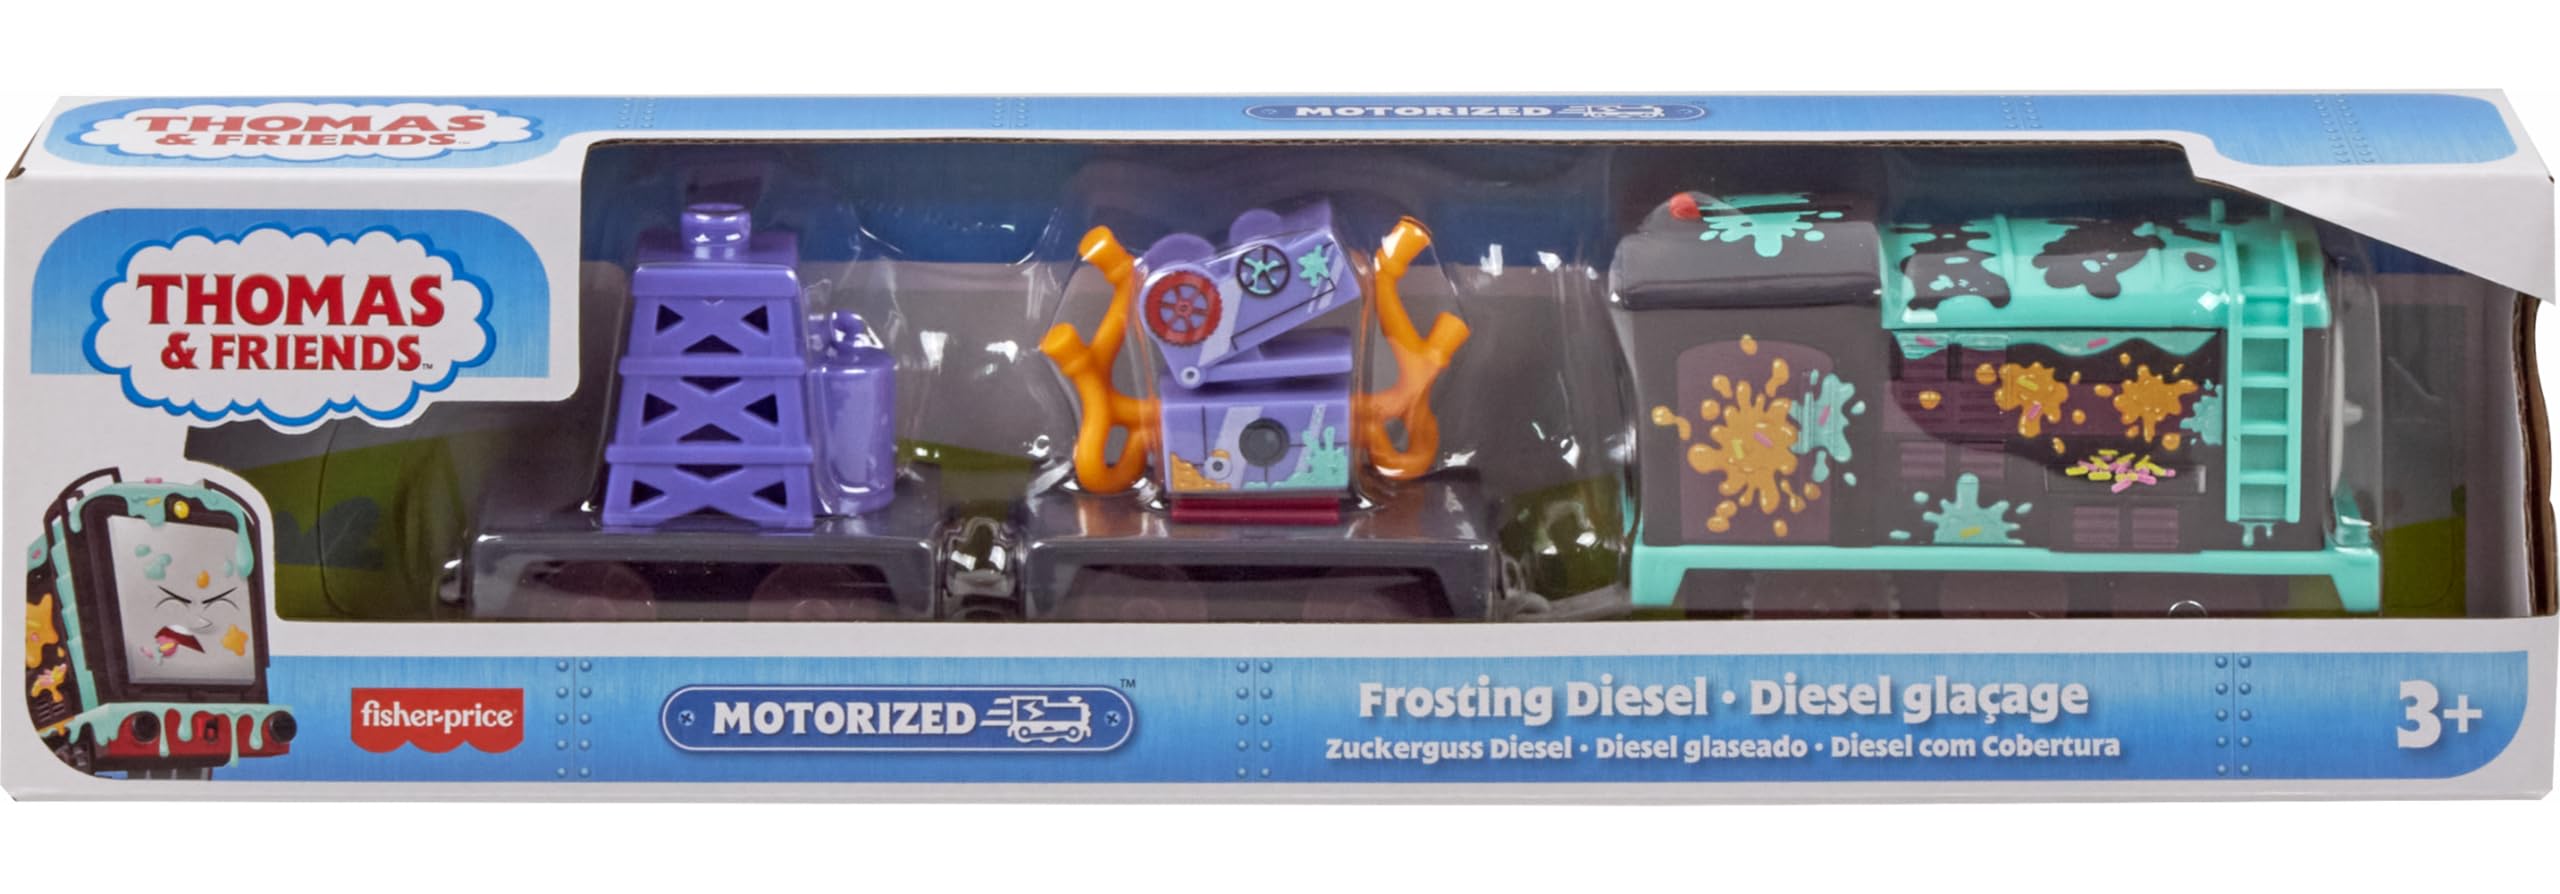 Thomas & Friends Motorized Toy Train, Frosting Diesel Engine with Cargo Car & Robot Piece for Preschool Kids Ages 3+ Years